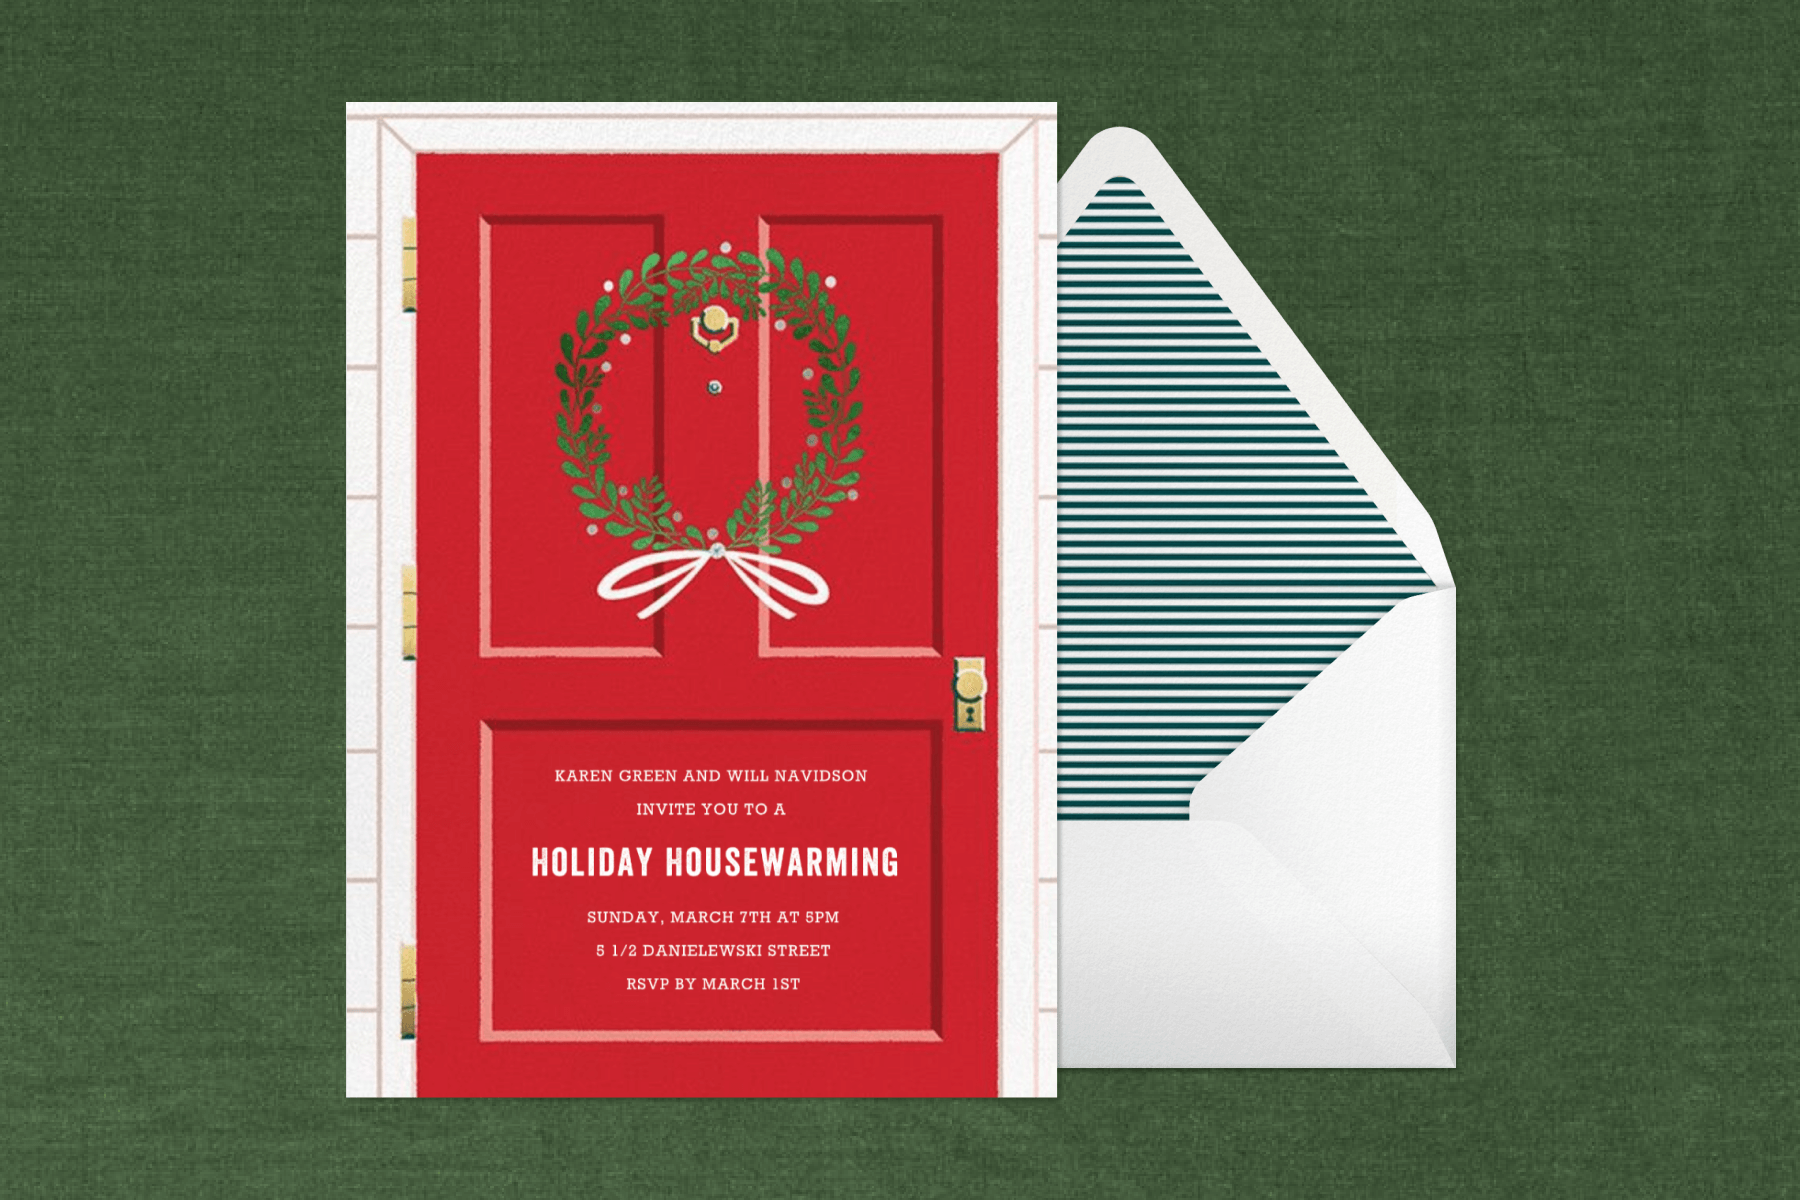 An invitation for a “holiday housewarming” with a big red door and a green wreath hanging on it on a green backdrop with a stripe-lined envelope.